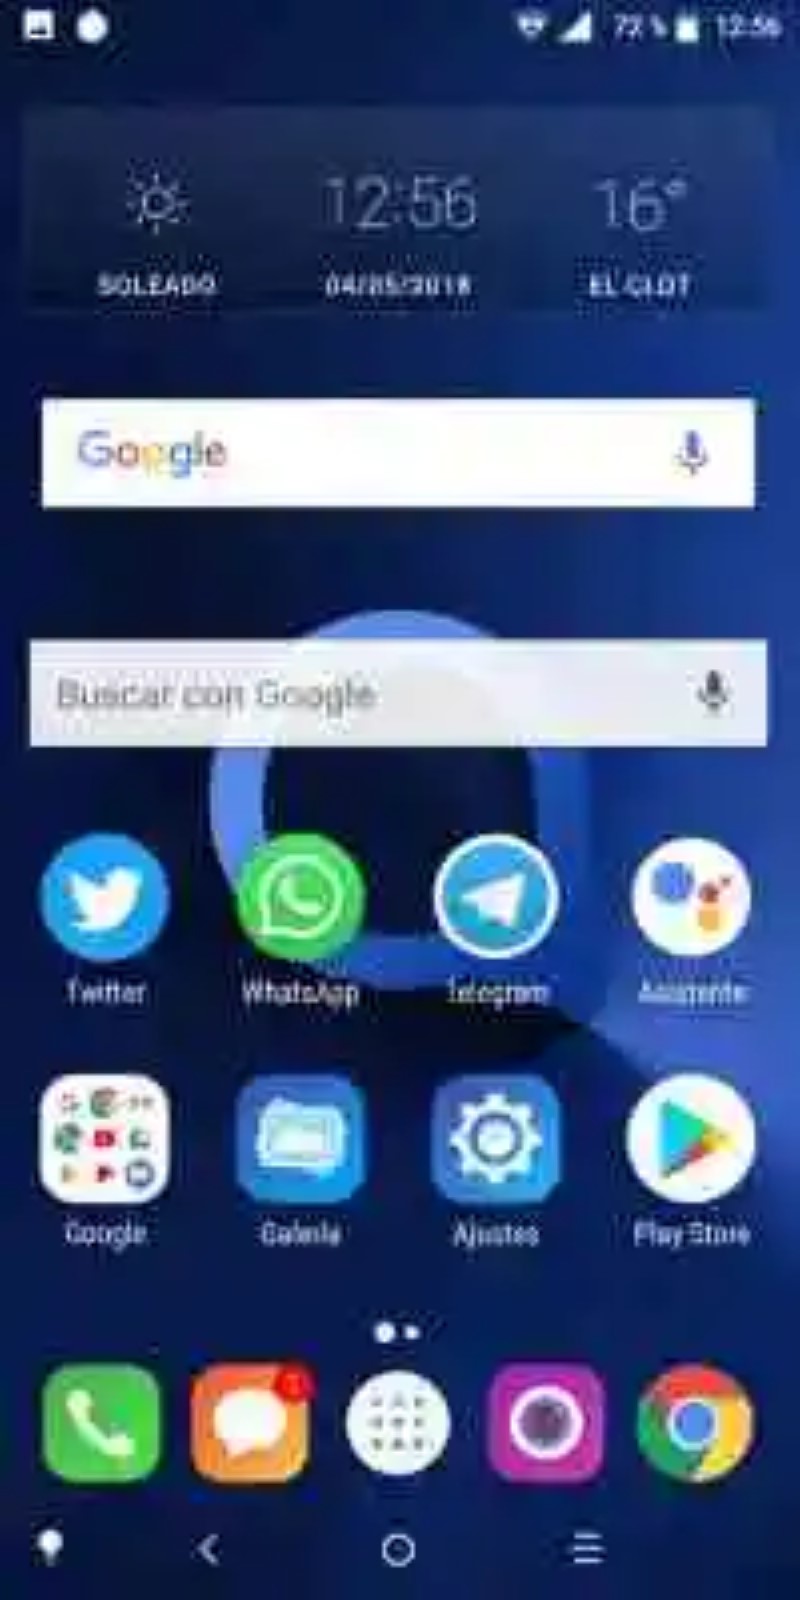 How to remove the widget from the search bar on your Android